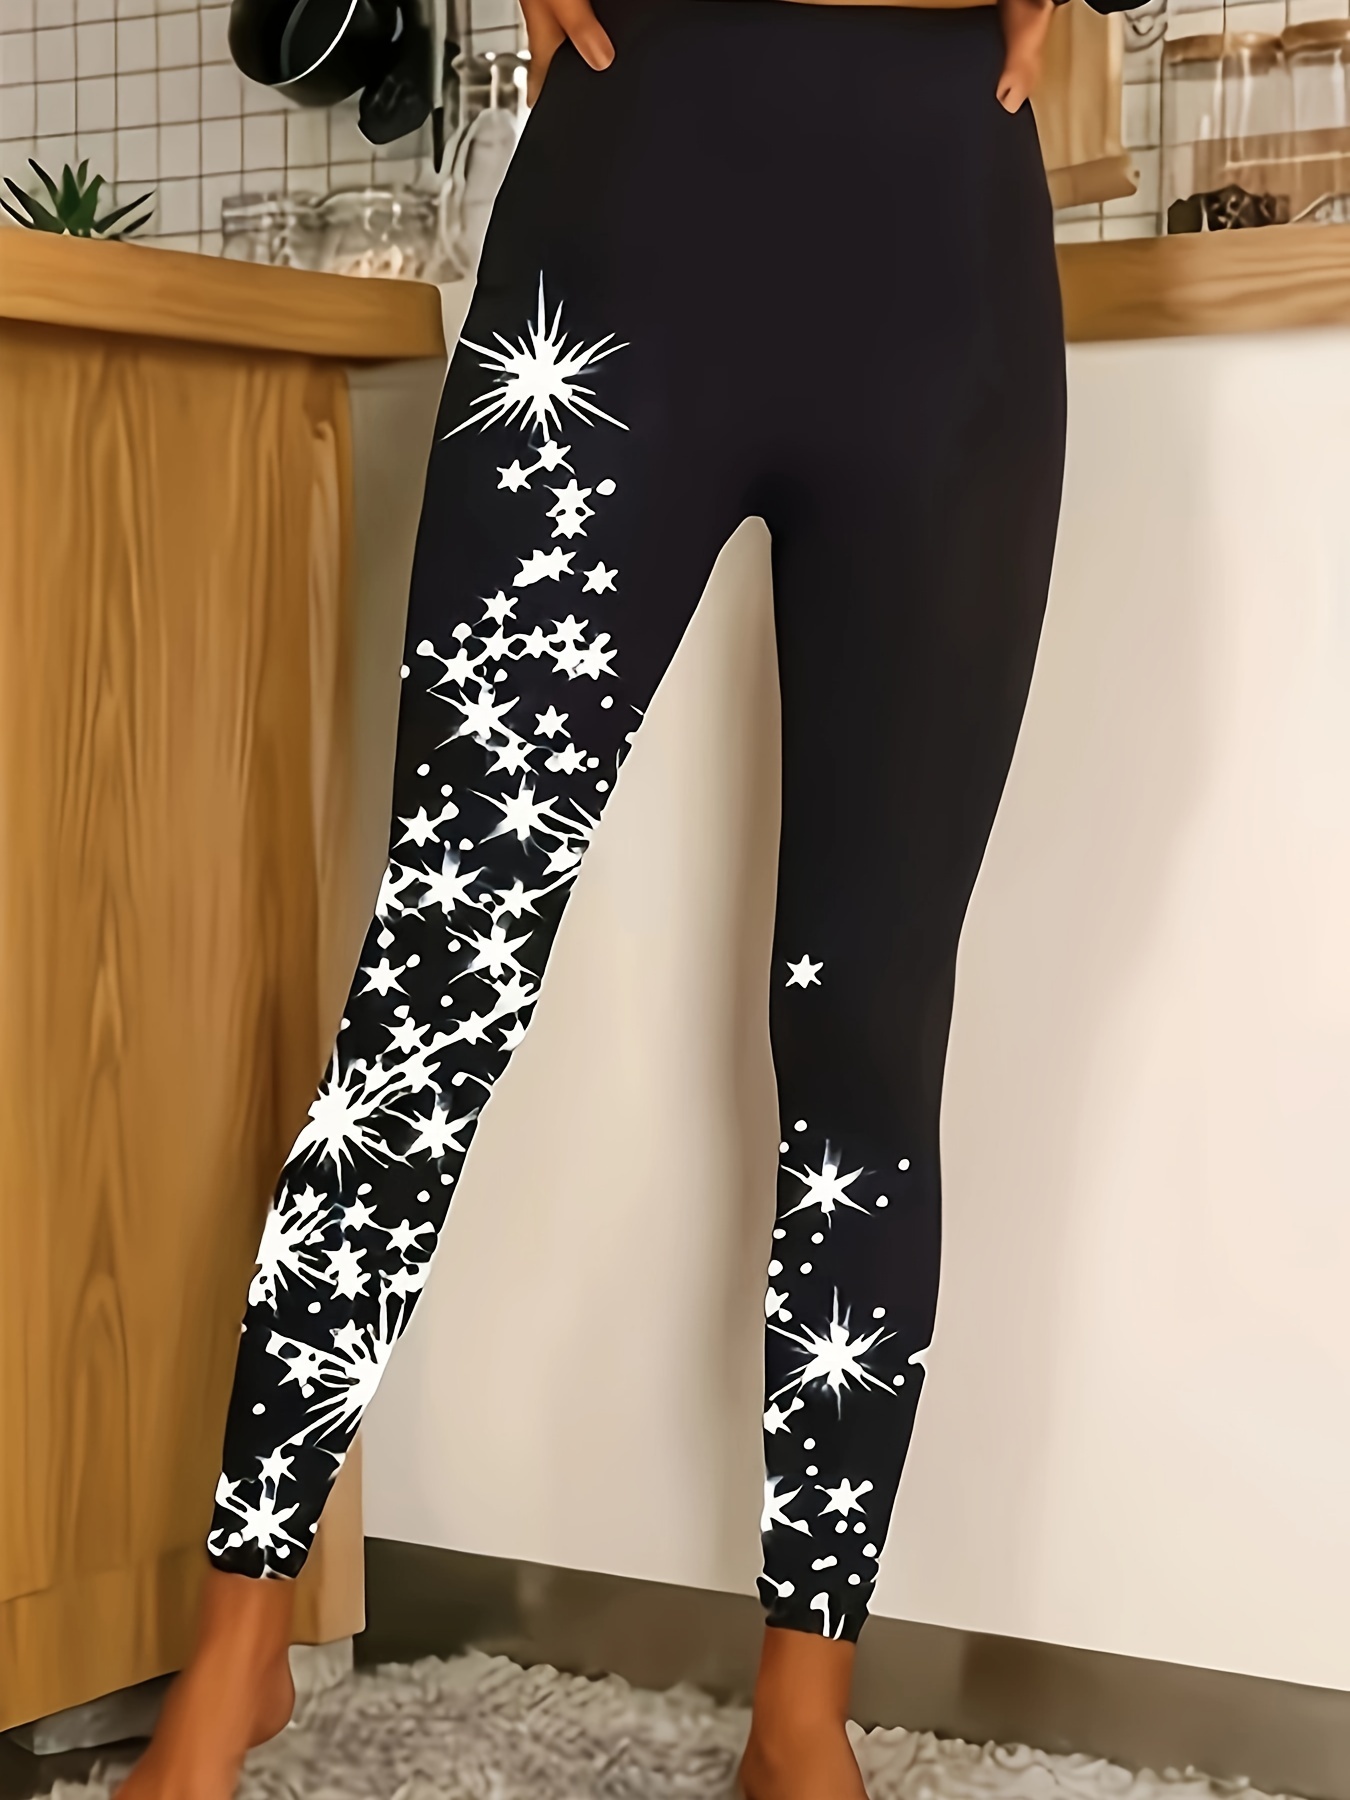 Gaecuw Stars and Stripes Leggings for Women Fashion Stretch